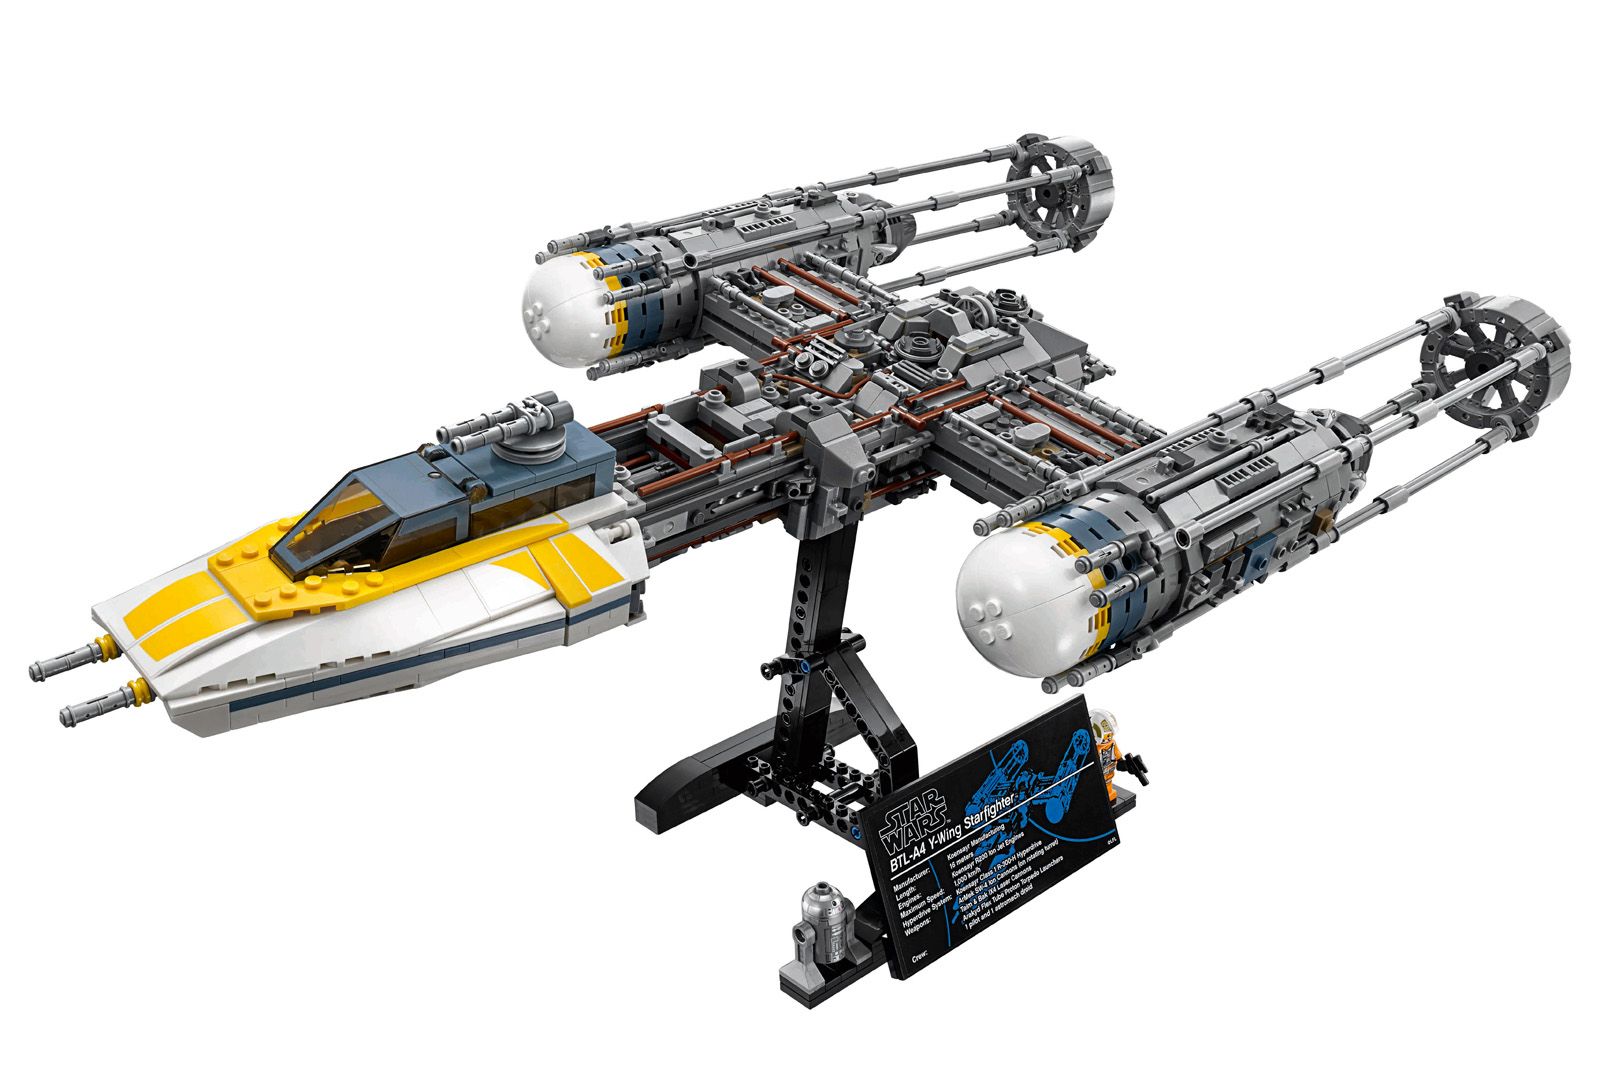 The latest Lego Star Wars set is a superb model of the Y-Wing Starfighter image 1